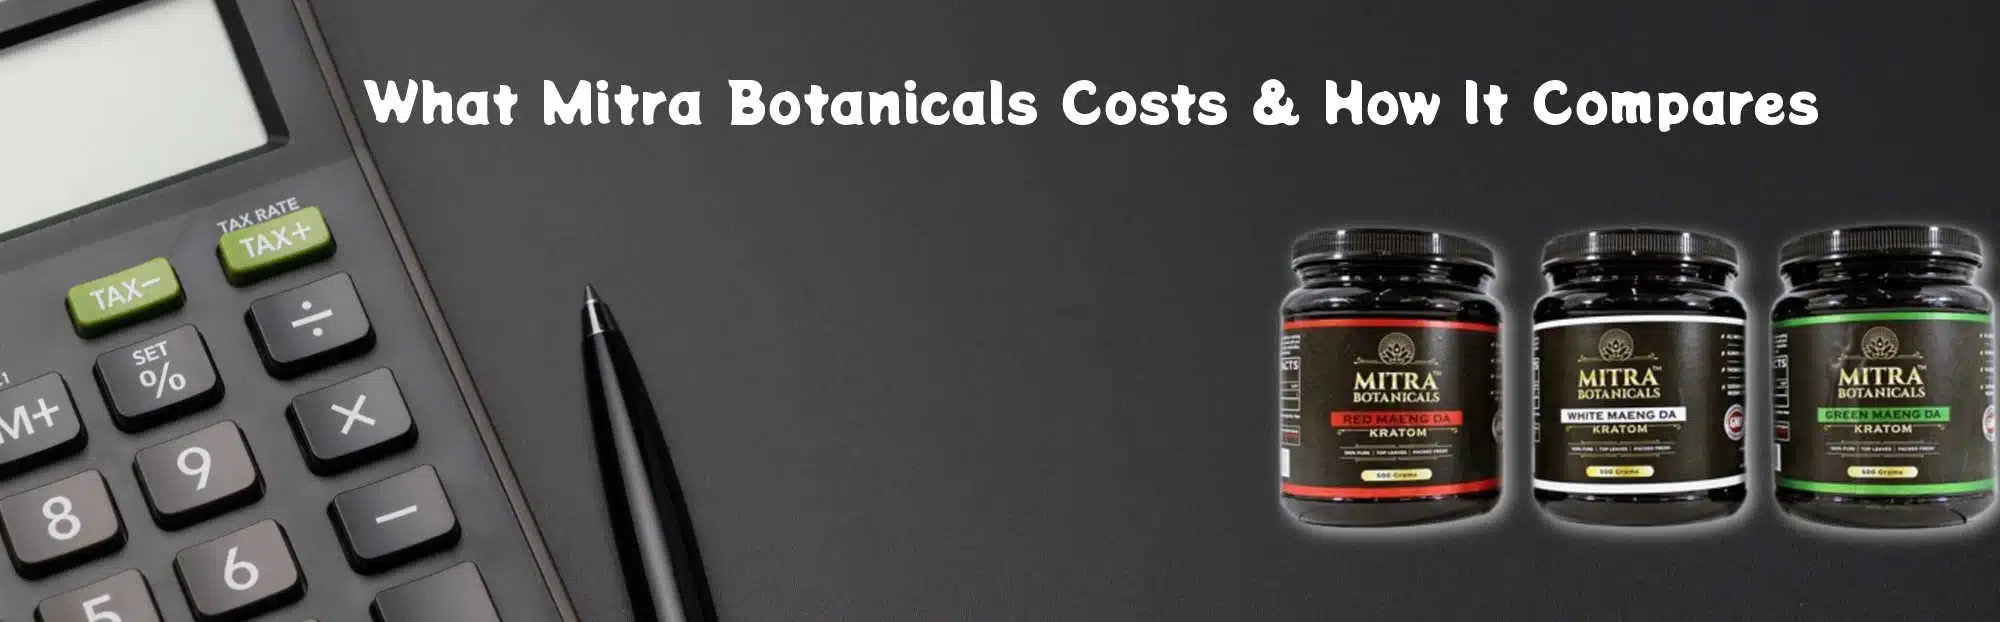 "What mitra botanicals costs and how it compares" banner with calculator and products